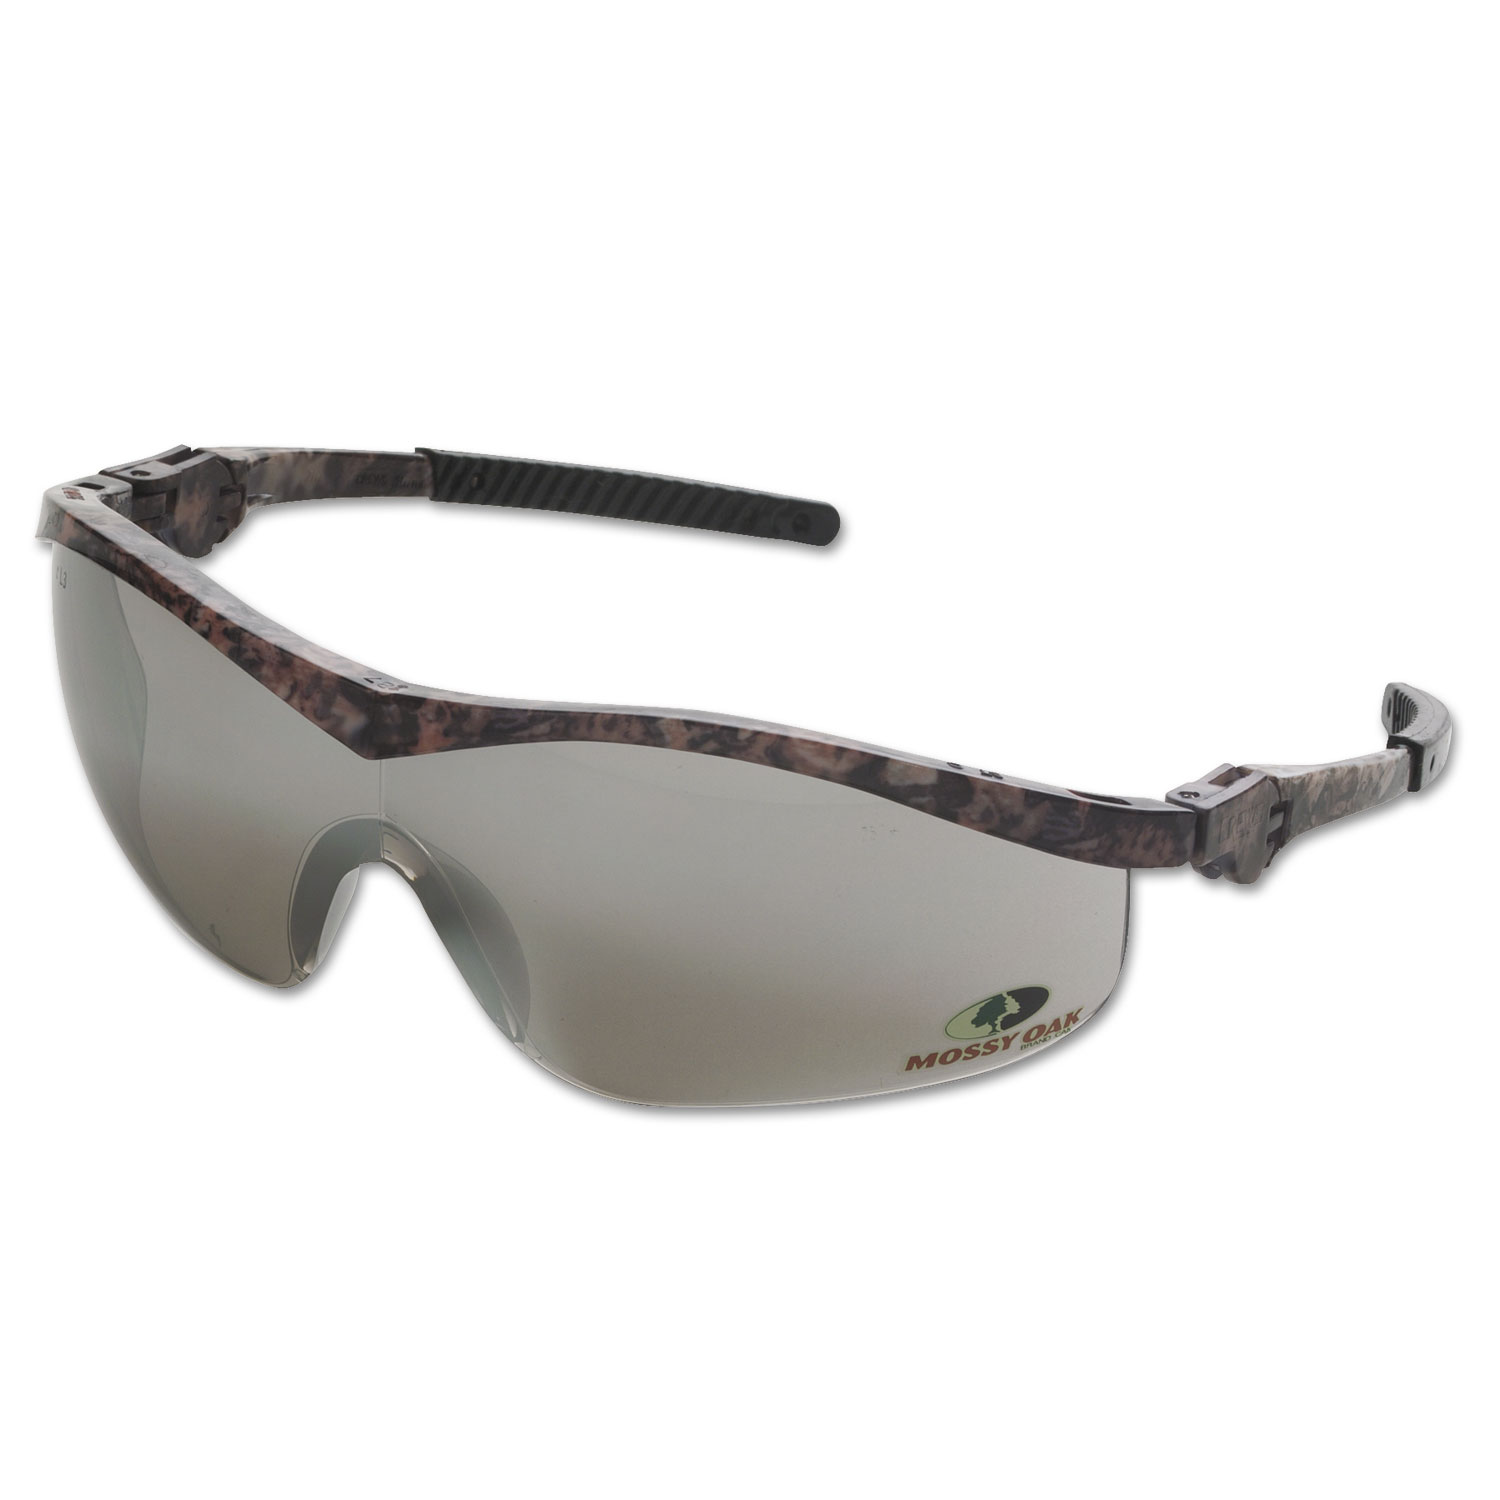 Mossy Oak Safety Glasses, Forest-Floor-Camo Frame, Silver-Mirror Lens